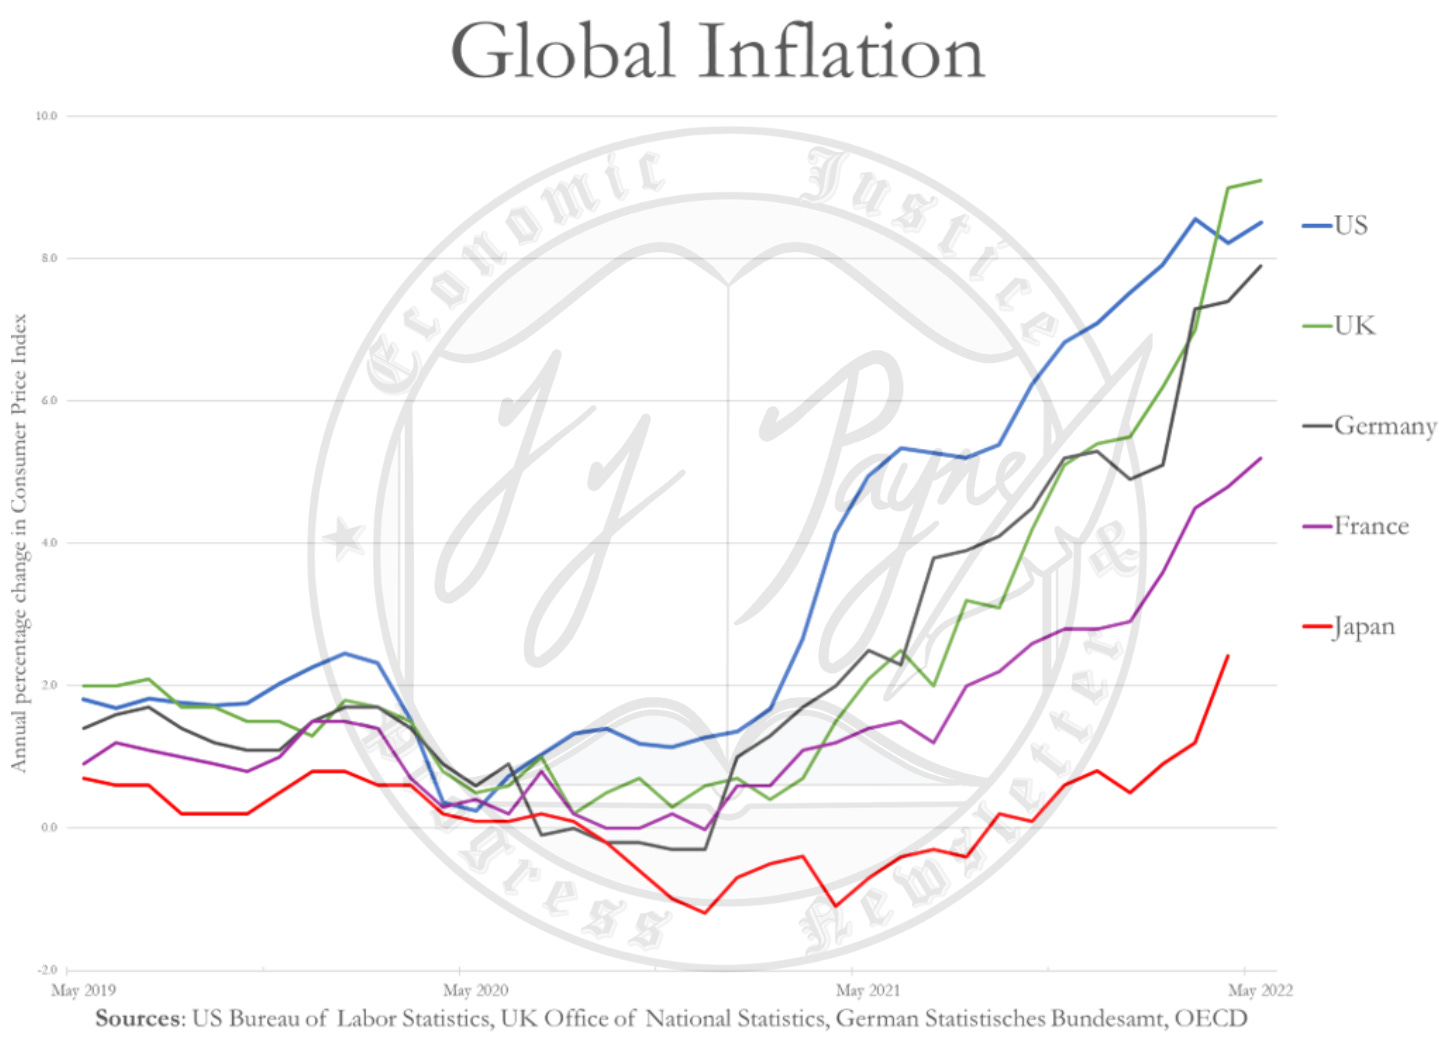 Global inflation graph showing US, UK, Germany, France, and Japan CPI trending upwards